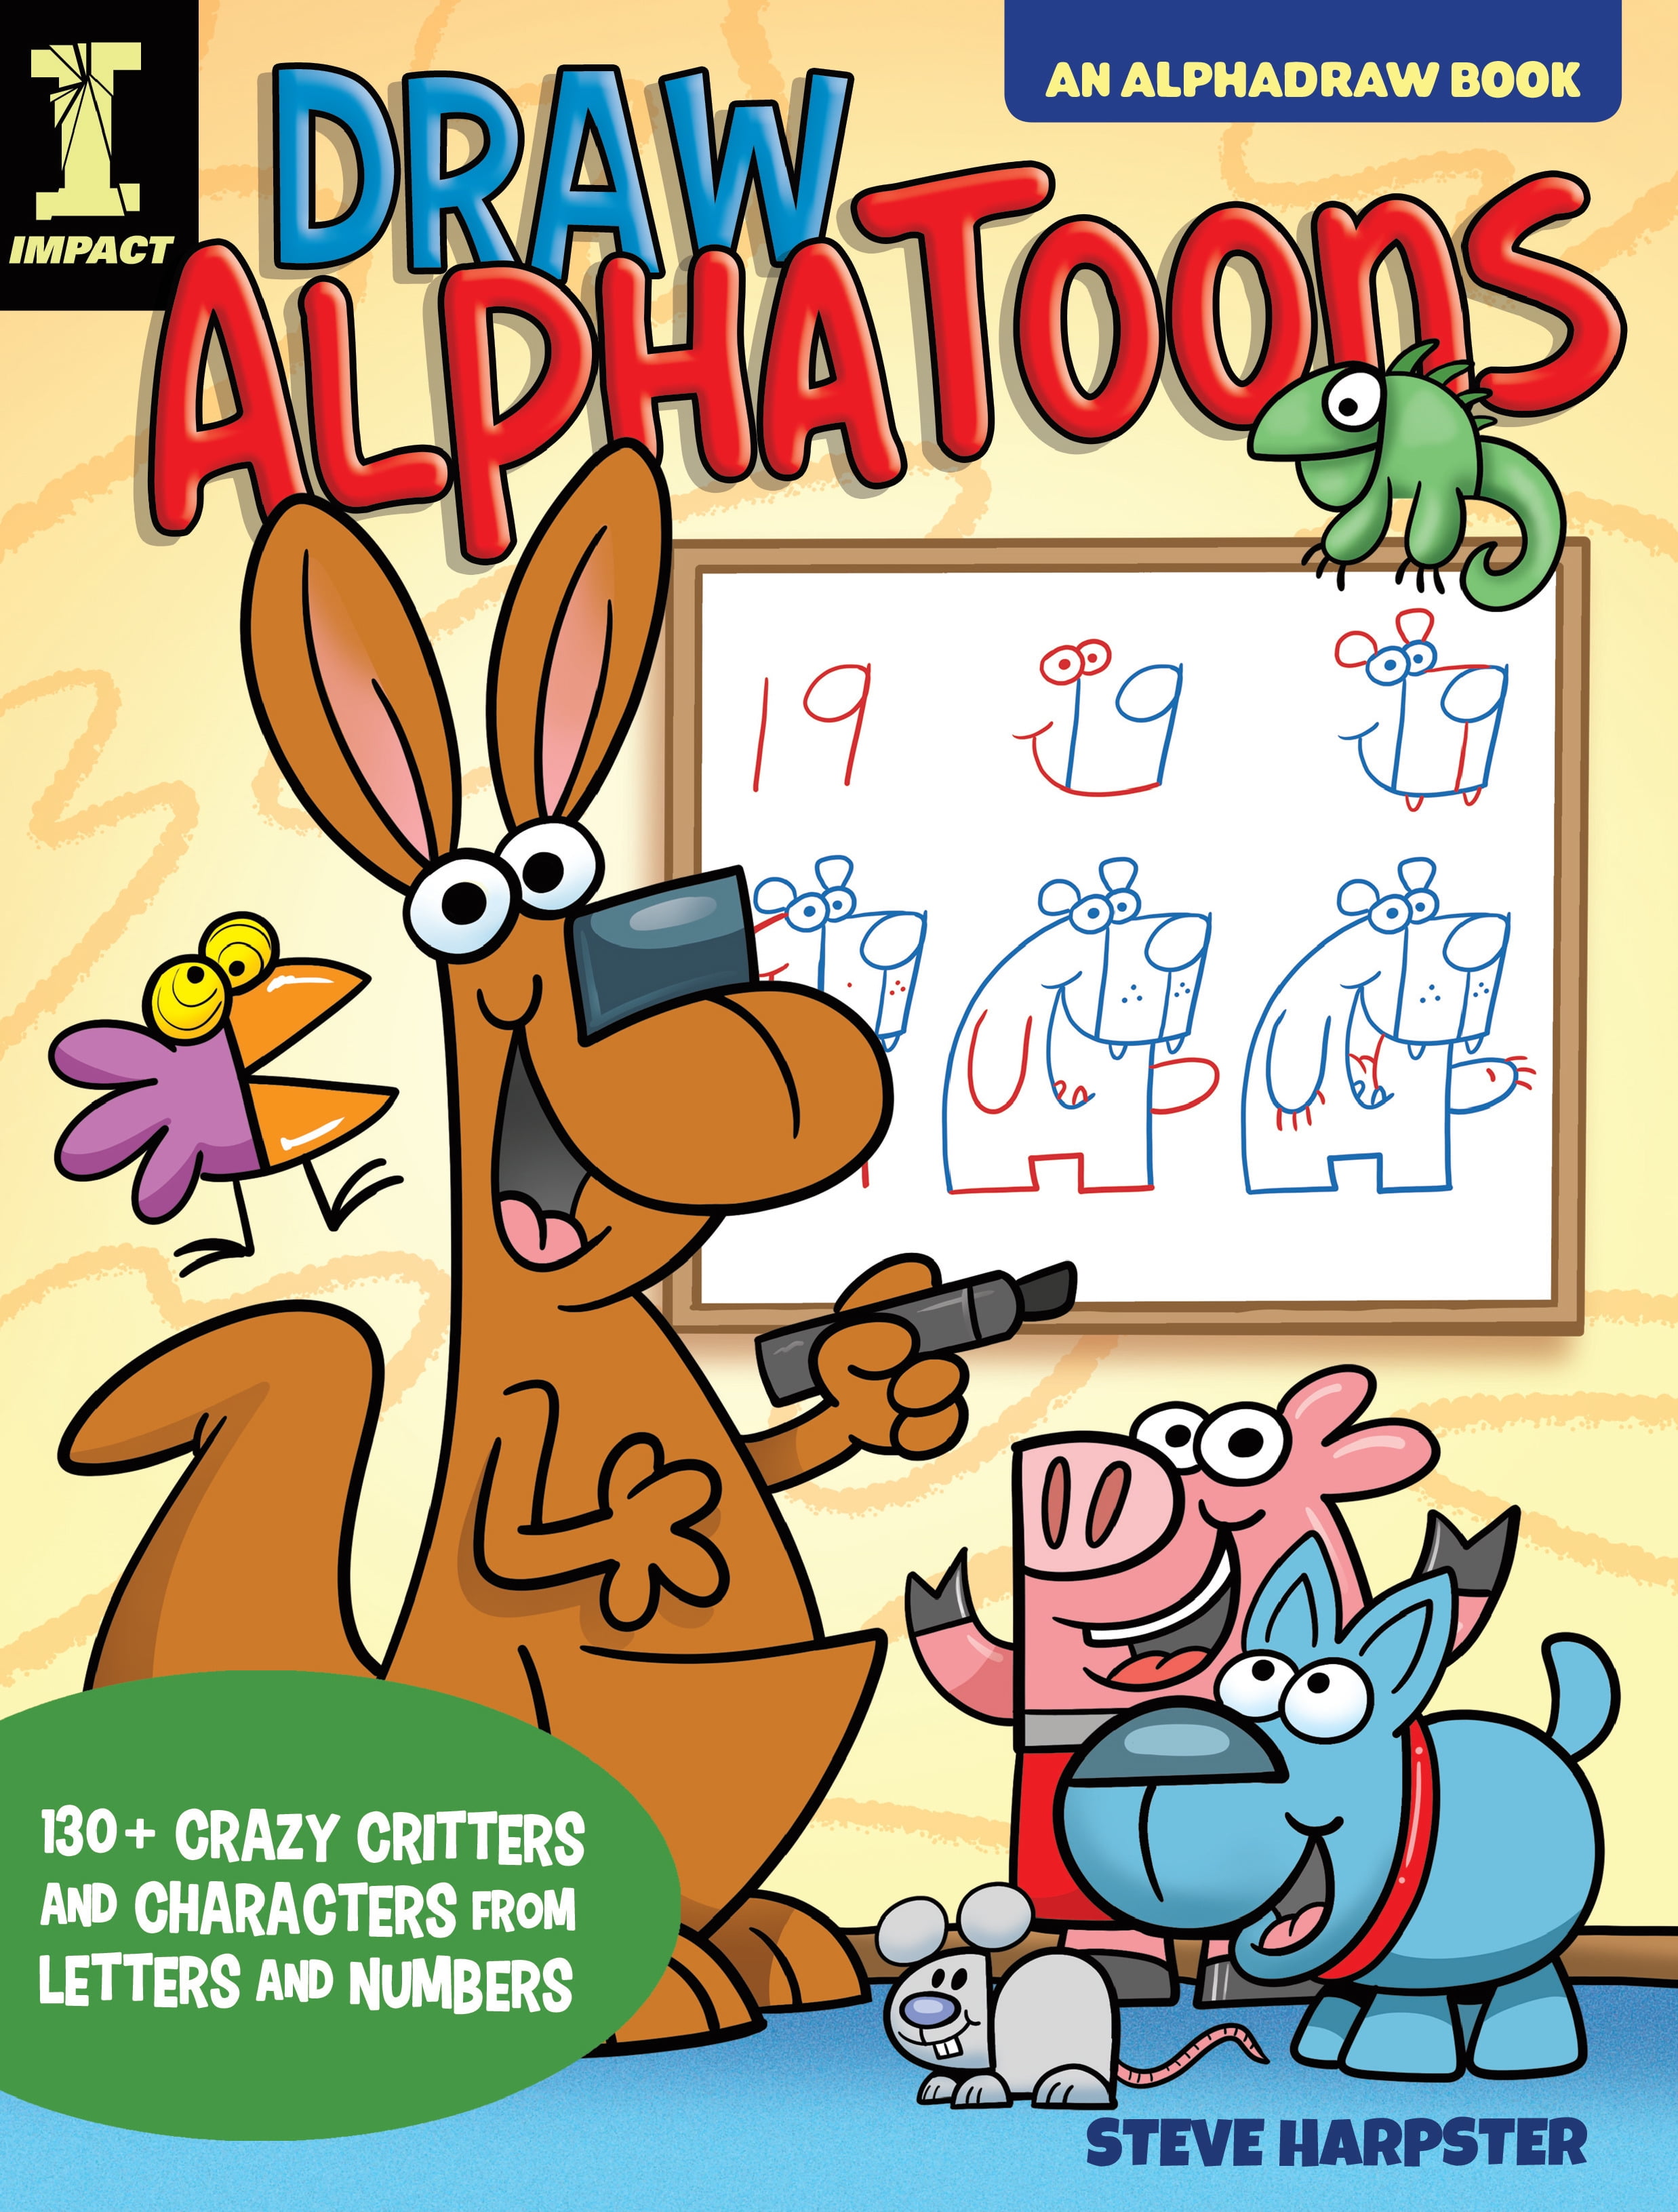 Alphadraw Draw Alphatoons 130 Crazy Critters And Characters From Letters And Numbers Paperback Walmart Com Walmart Com